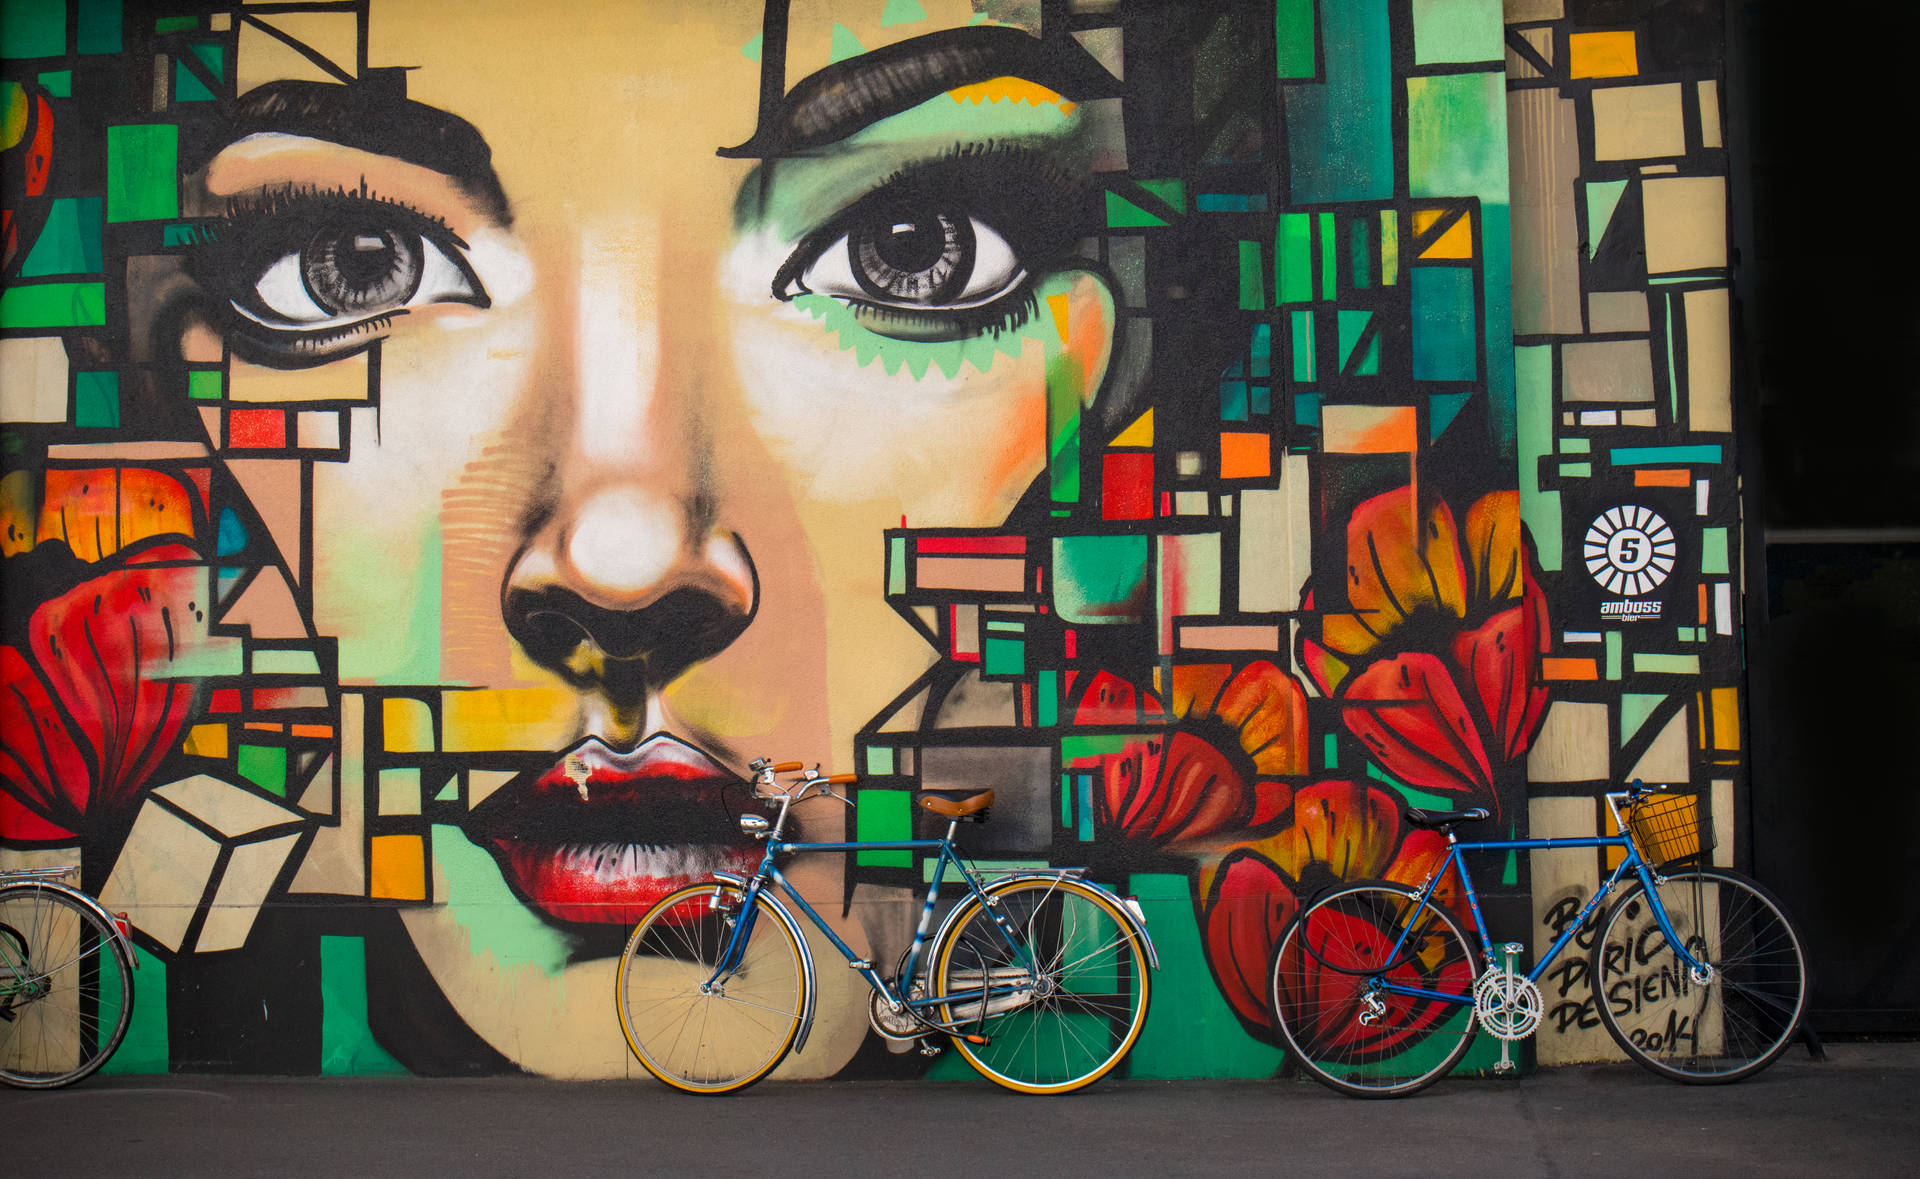 Portrait graffiti of a beautiful woman with colorful shapes on the side and bicycles leaning on the wall.